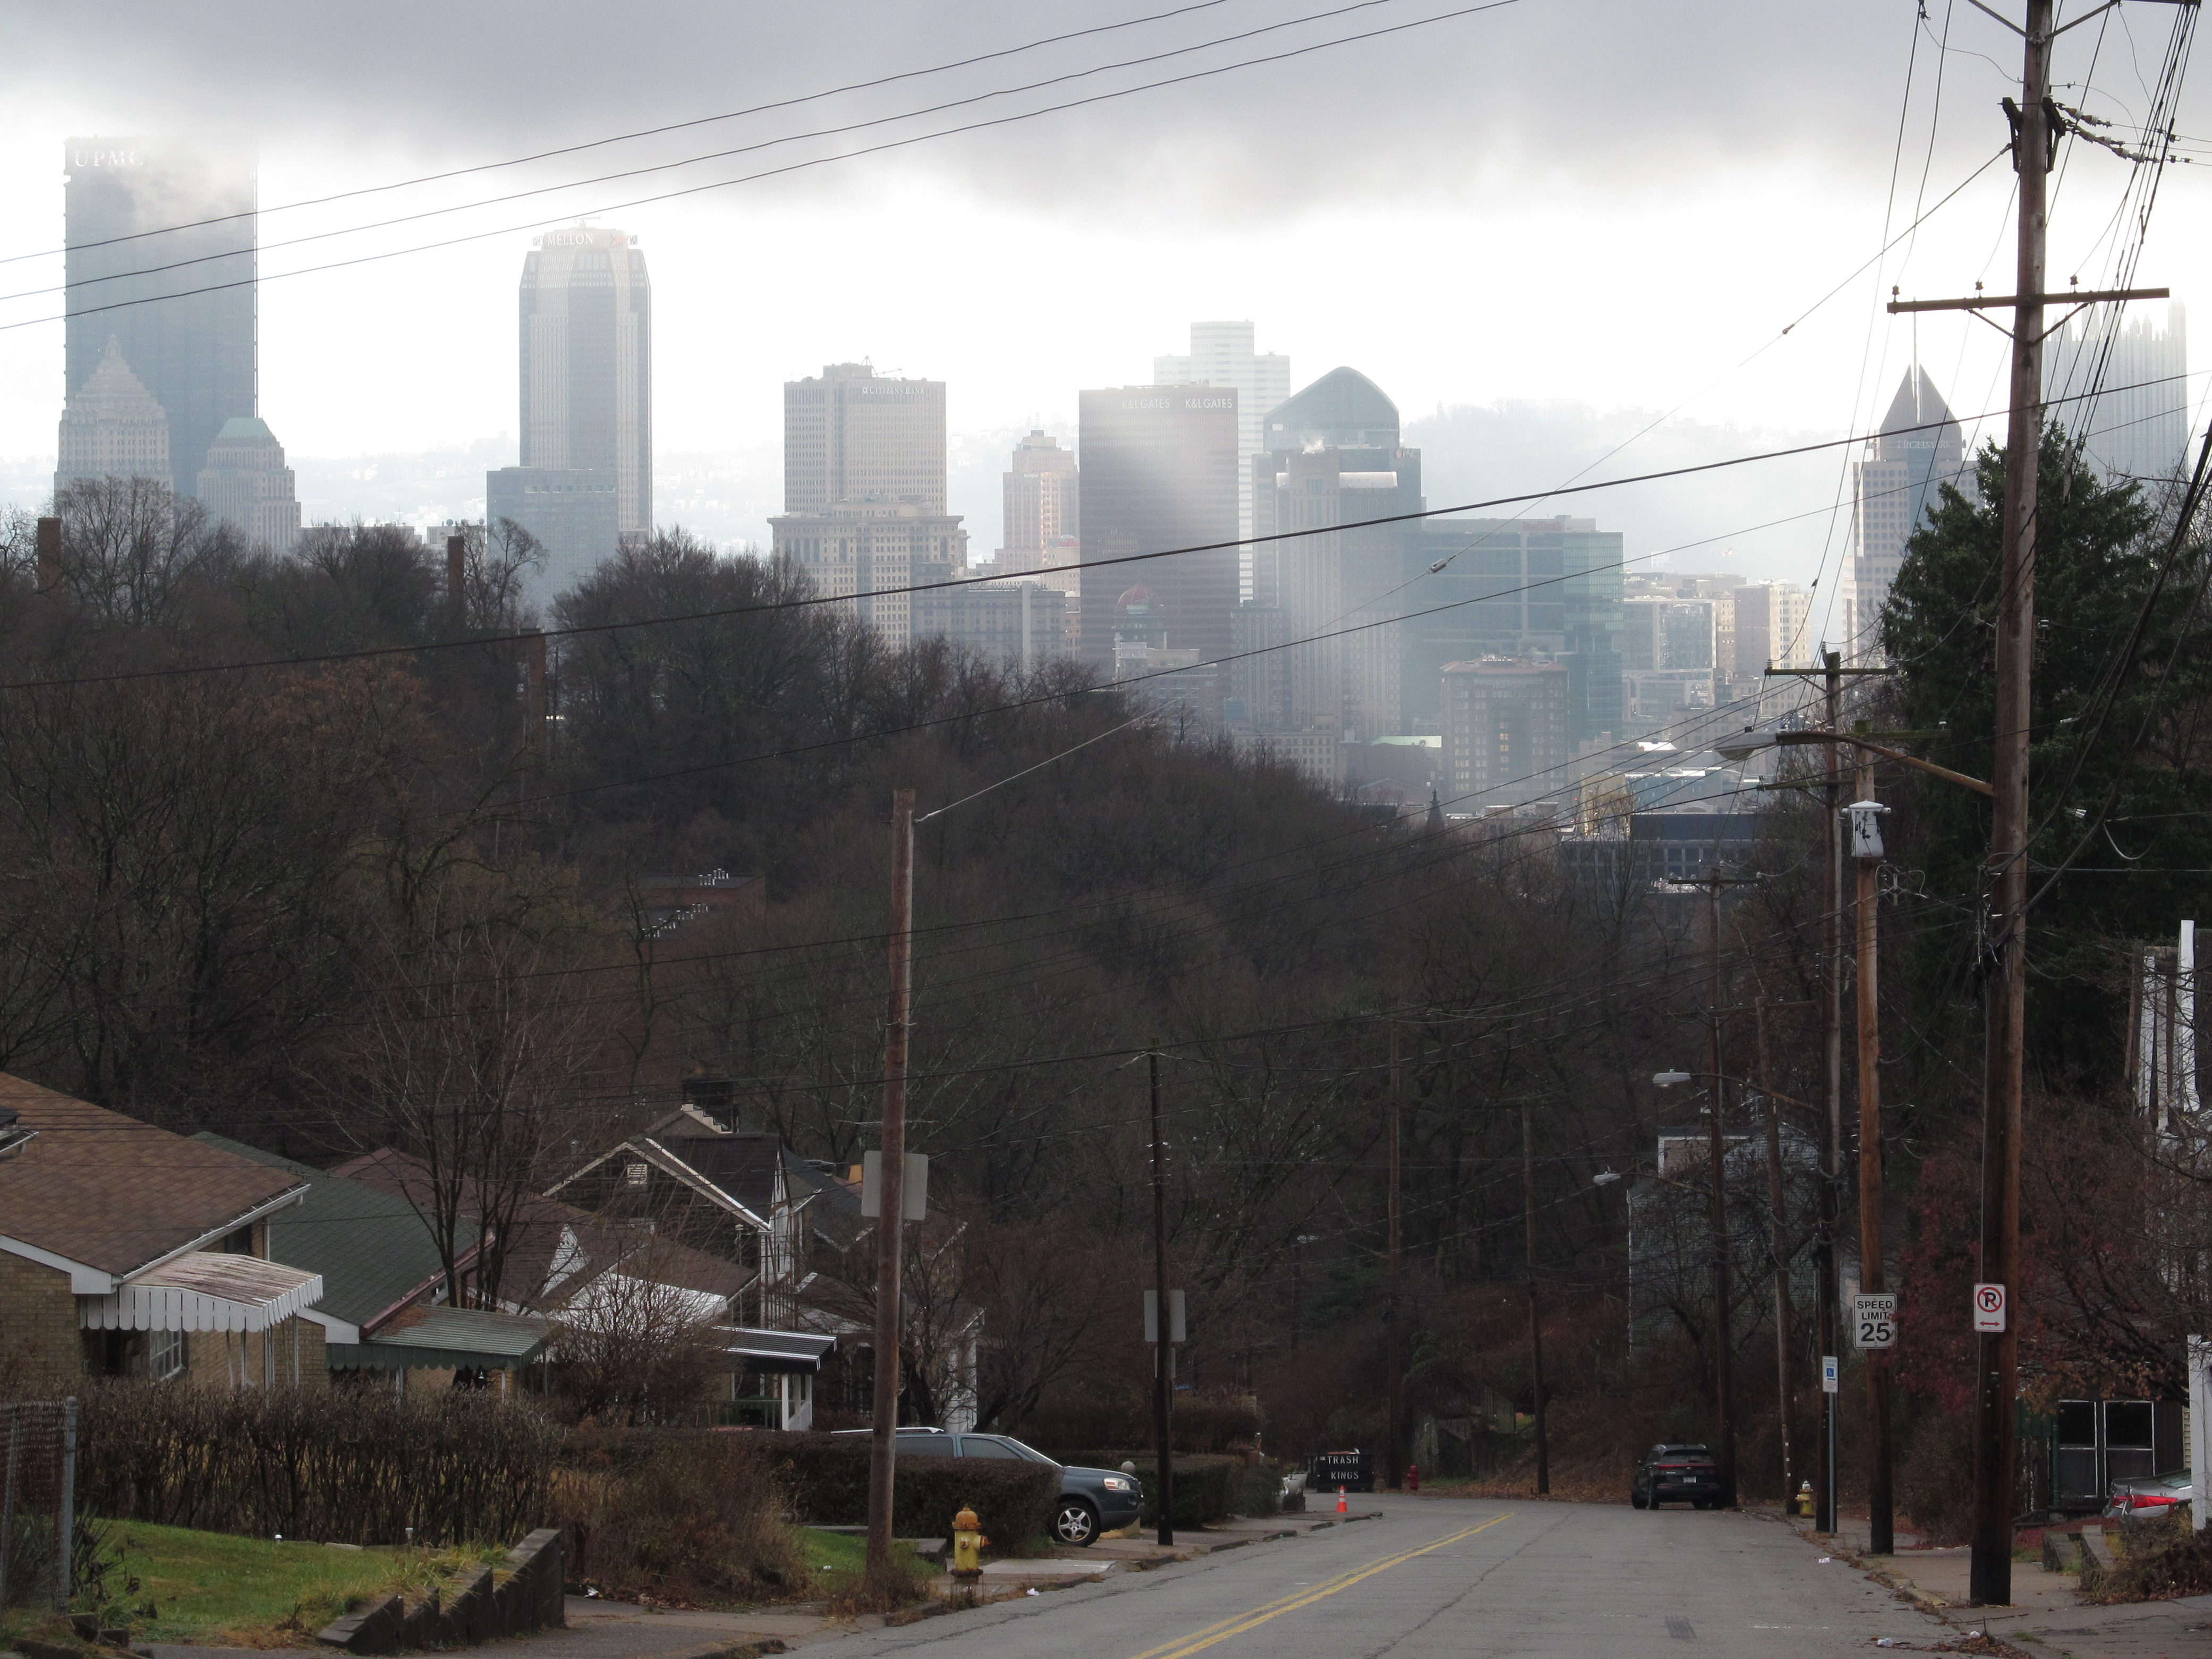 Downtown Pittsburgh from Federal Street, Lafayette Hilltop, North Side  Source: Cbaile19